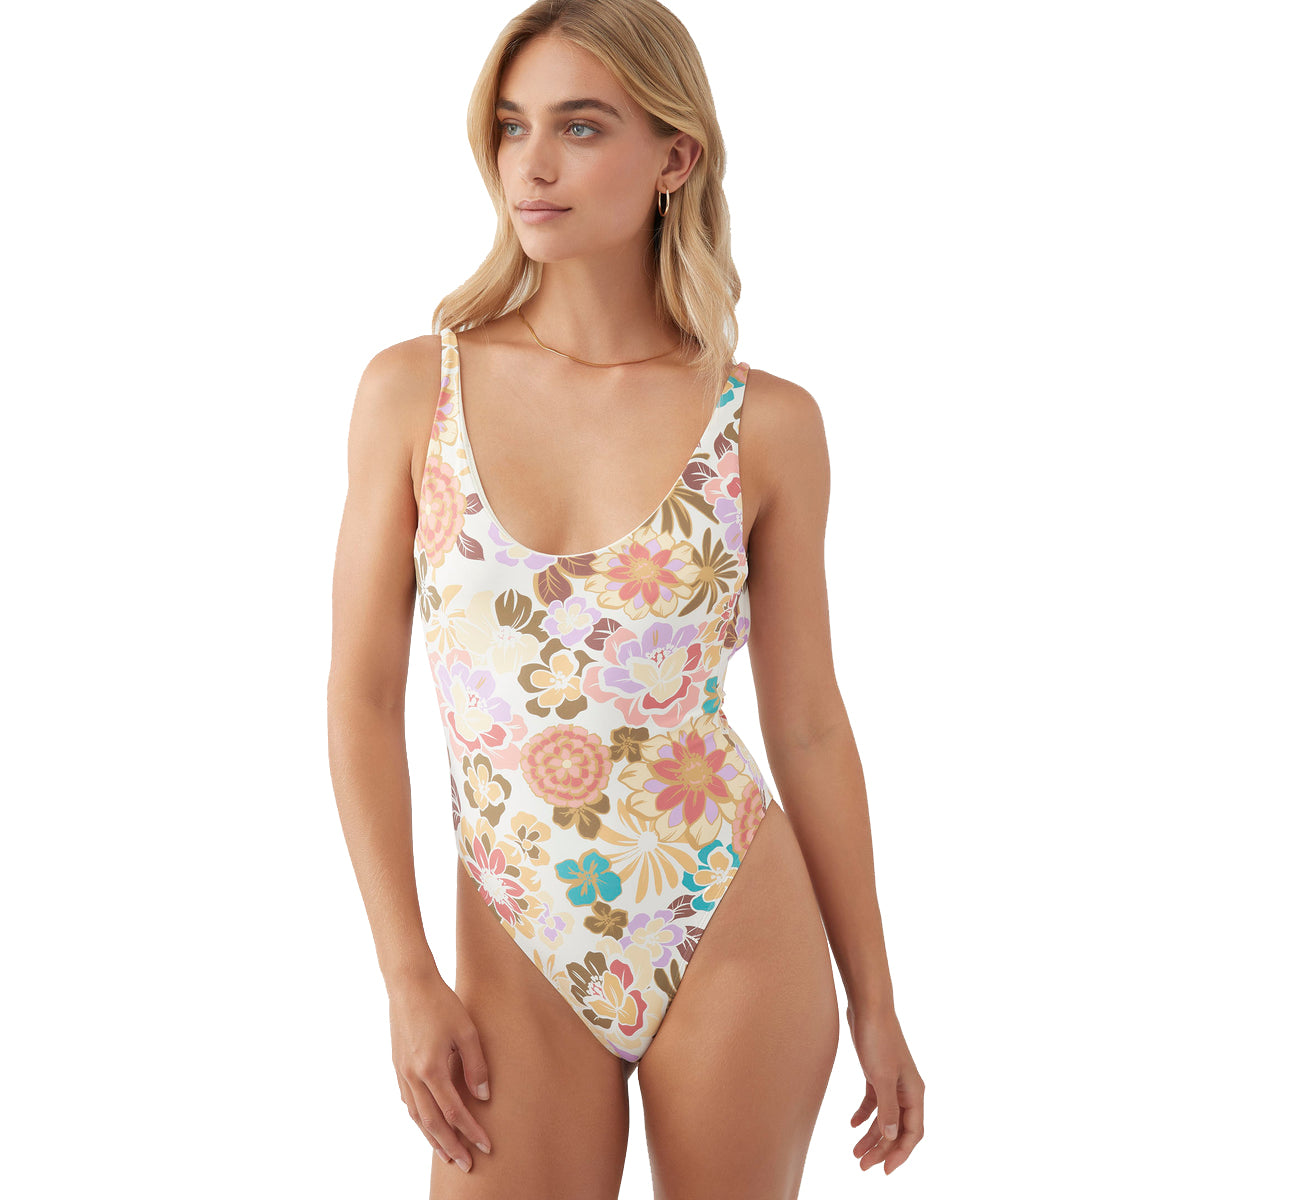 O'NEILL MEADOW FLORAL ONE PIECE